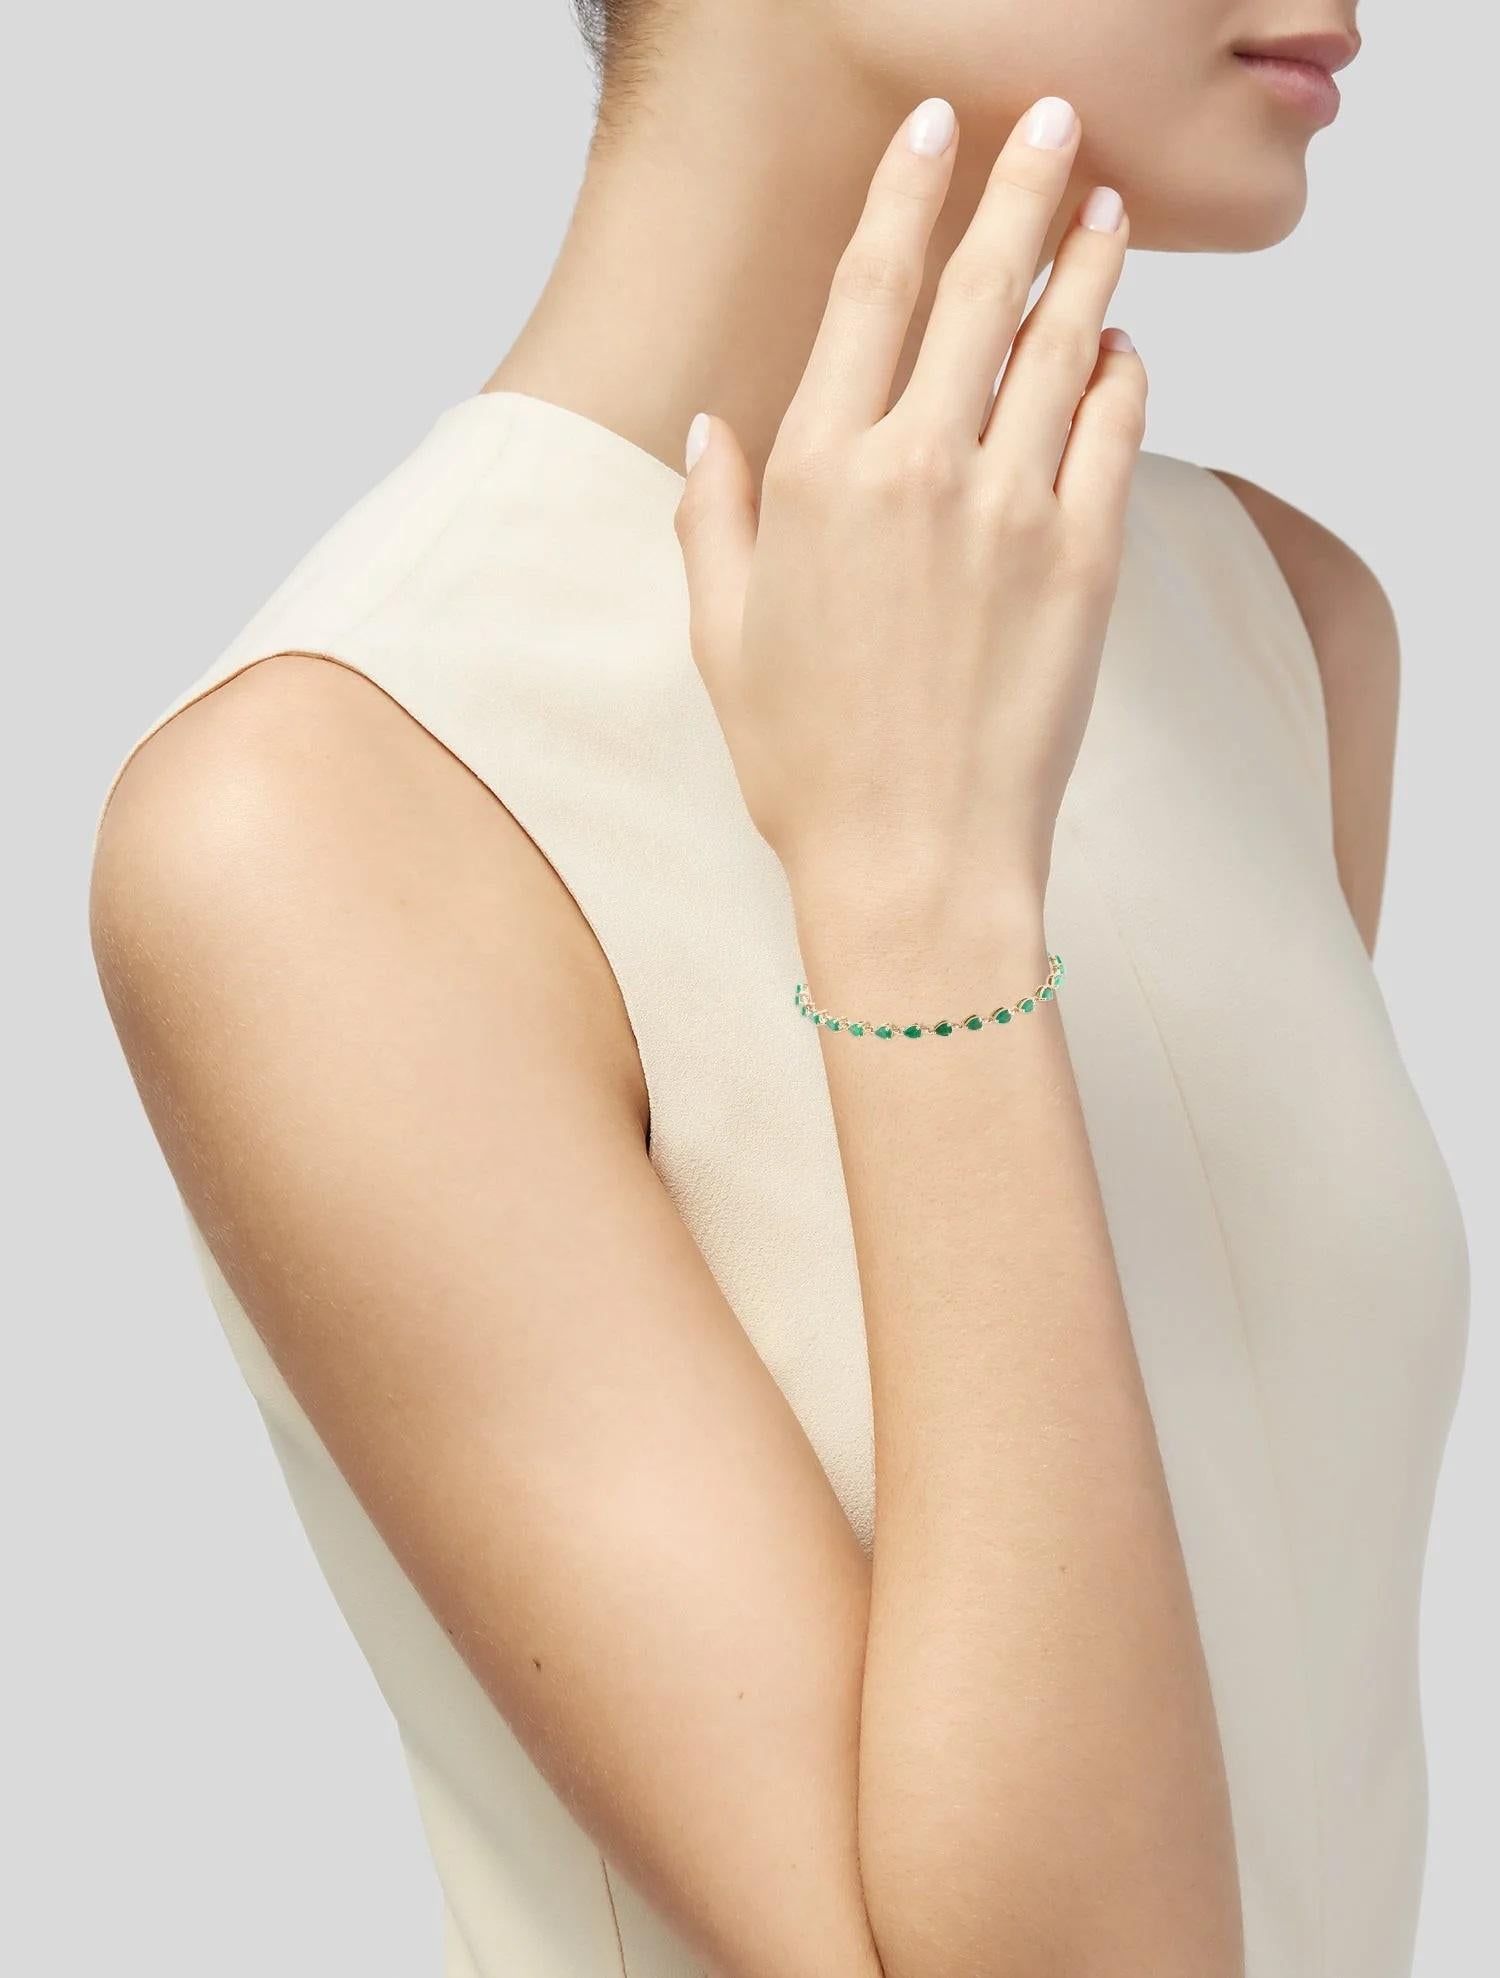 Illuminate your wrist with the captivating beauty of this 14K yellow gold tennis bracelet, featuring a stunning 3.80 carat faceted pear-shaped emerald. With 27 meticulously set emeralds displaying a rich green hue, this bracelet is a timeless